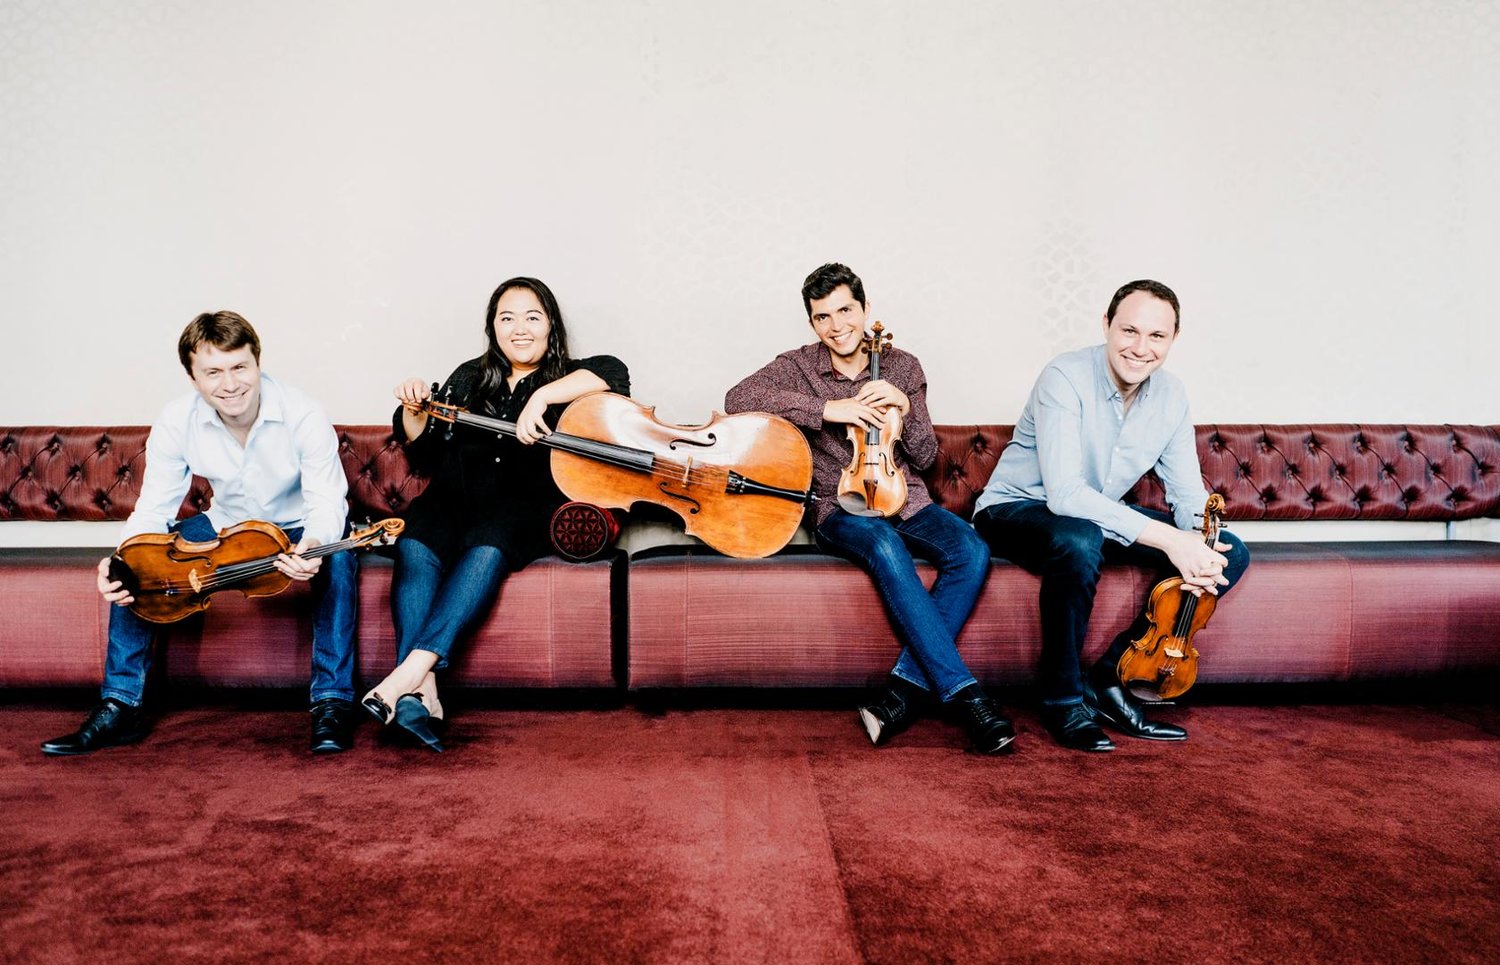 The Calidore String Quartet will perform next Friday at the Sharon Kay Dean Recital Hall in PSU’s McCray Hall.